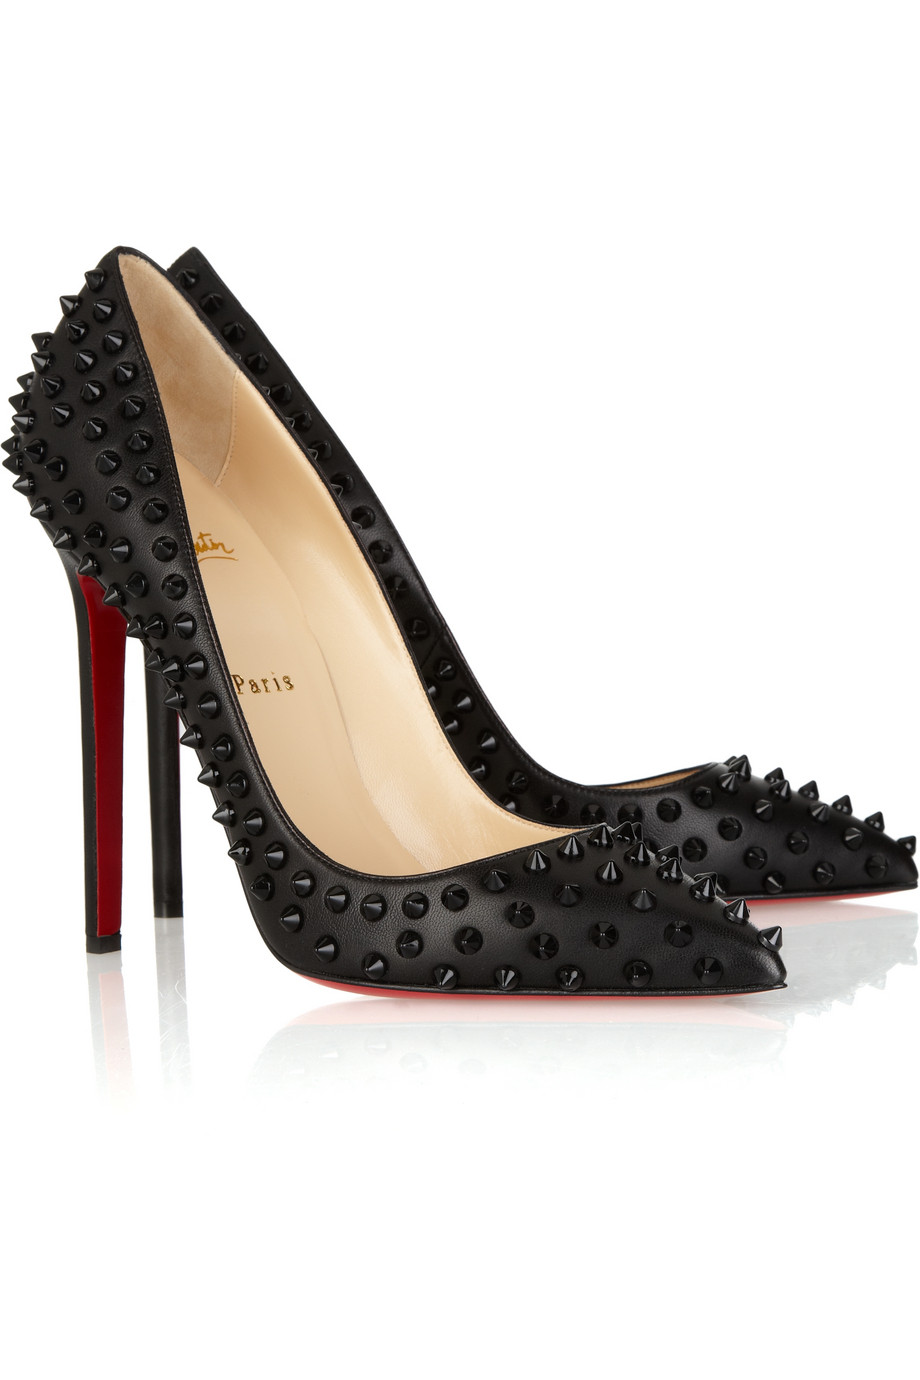 view-more-by-christian-louboutin-black-pigalle-spikes-120-studded-leather-pumps-product-1-708163-840388883.jpeg  